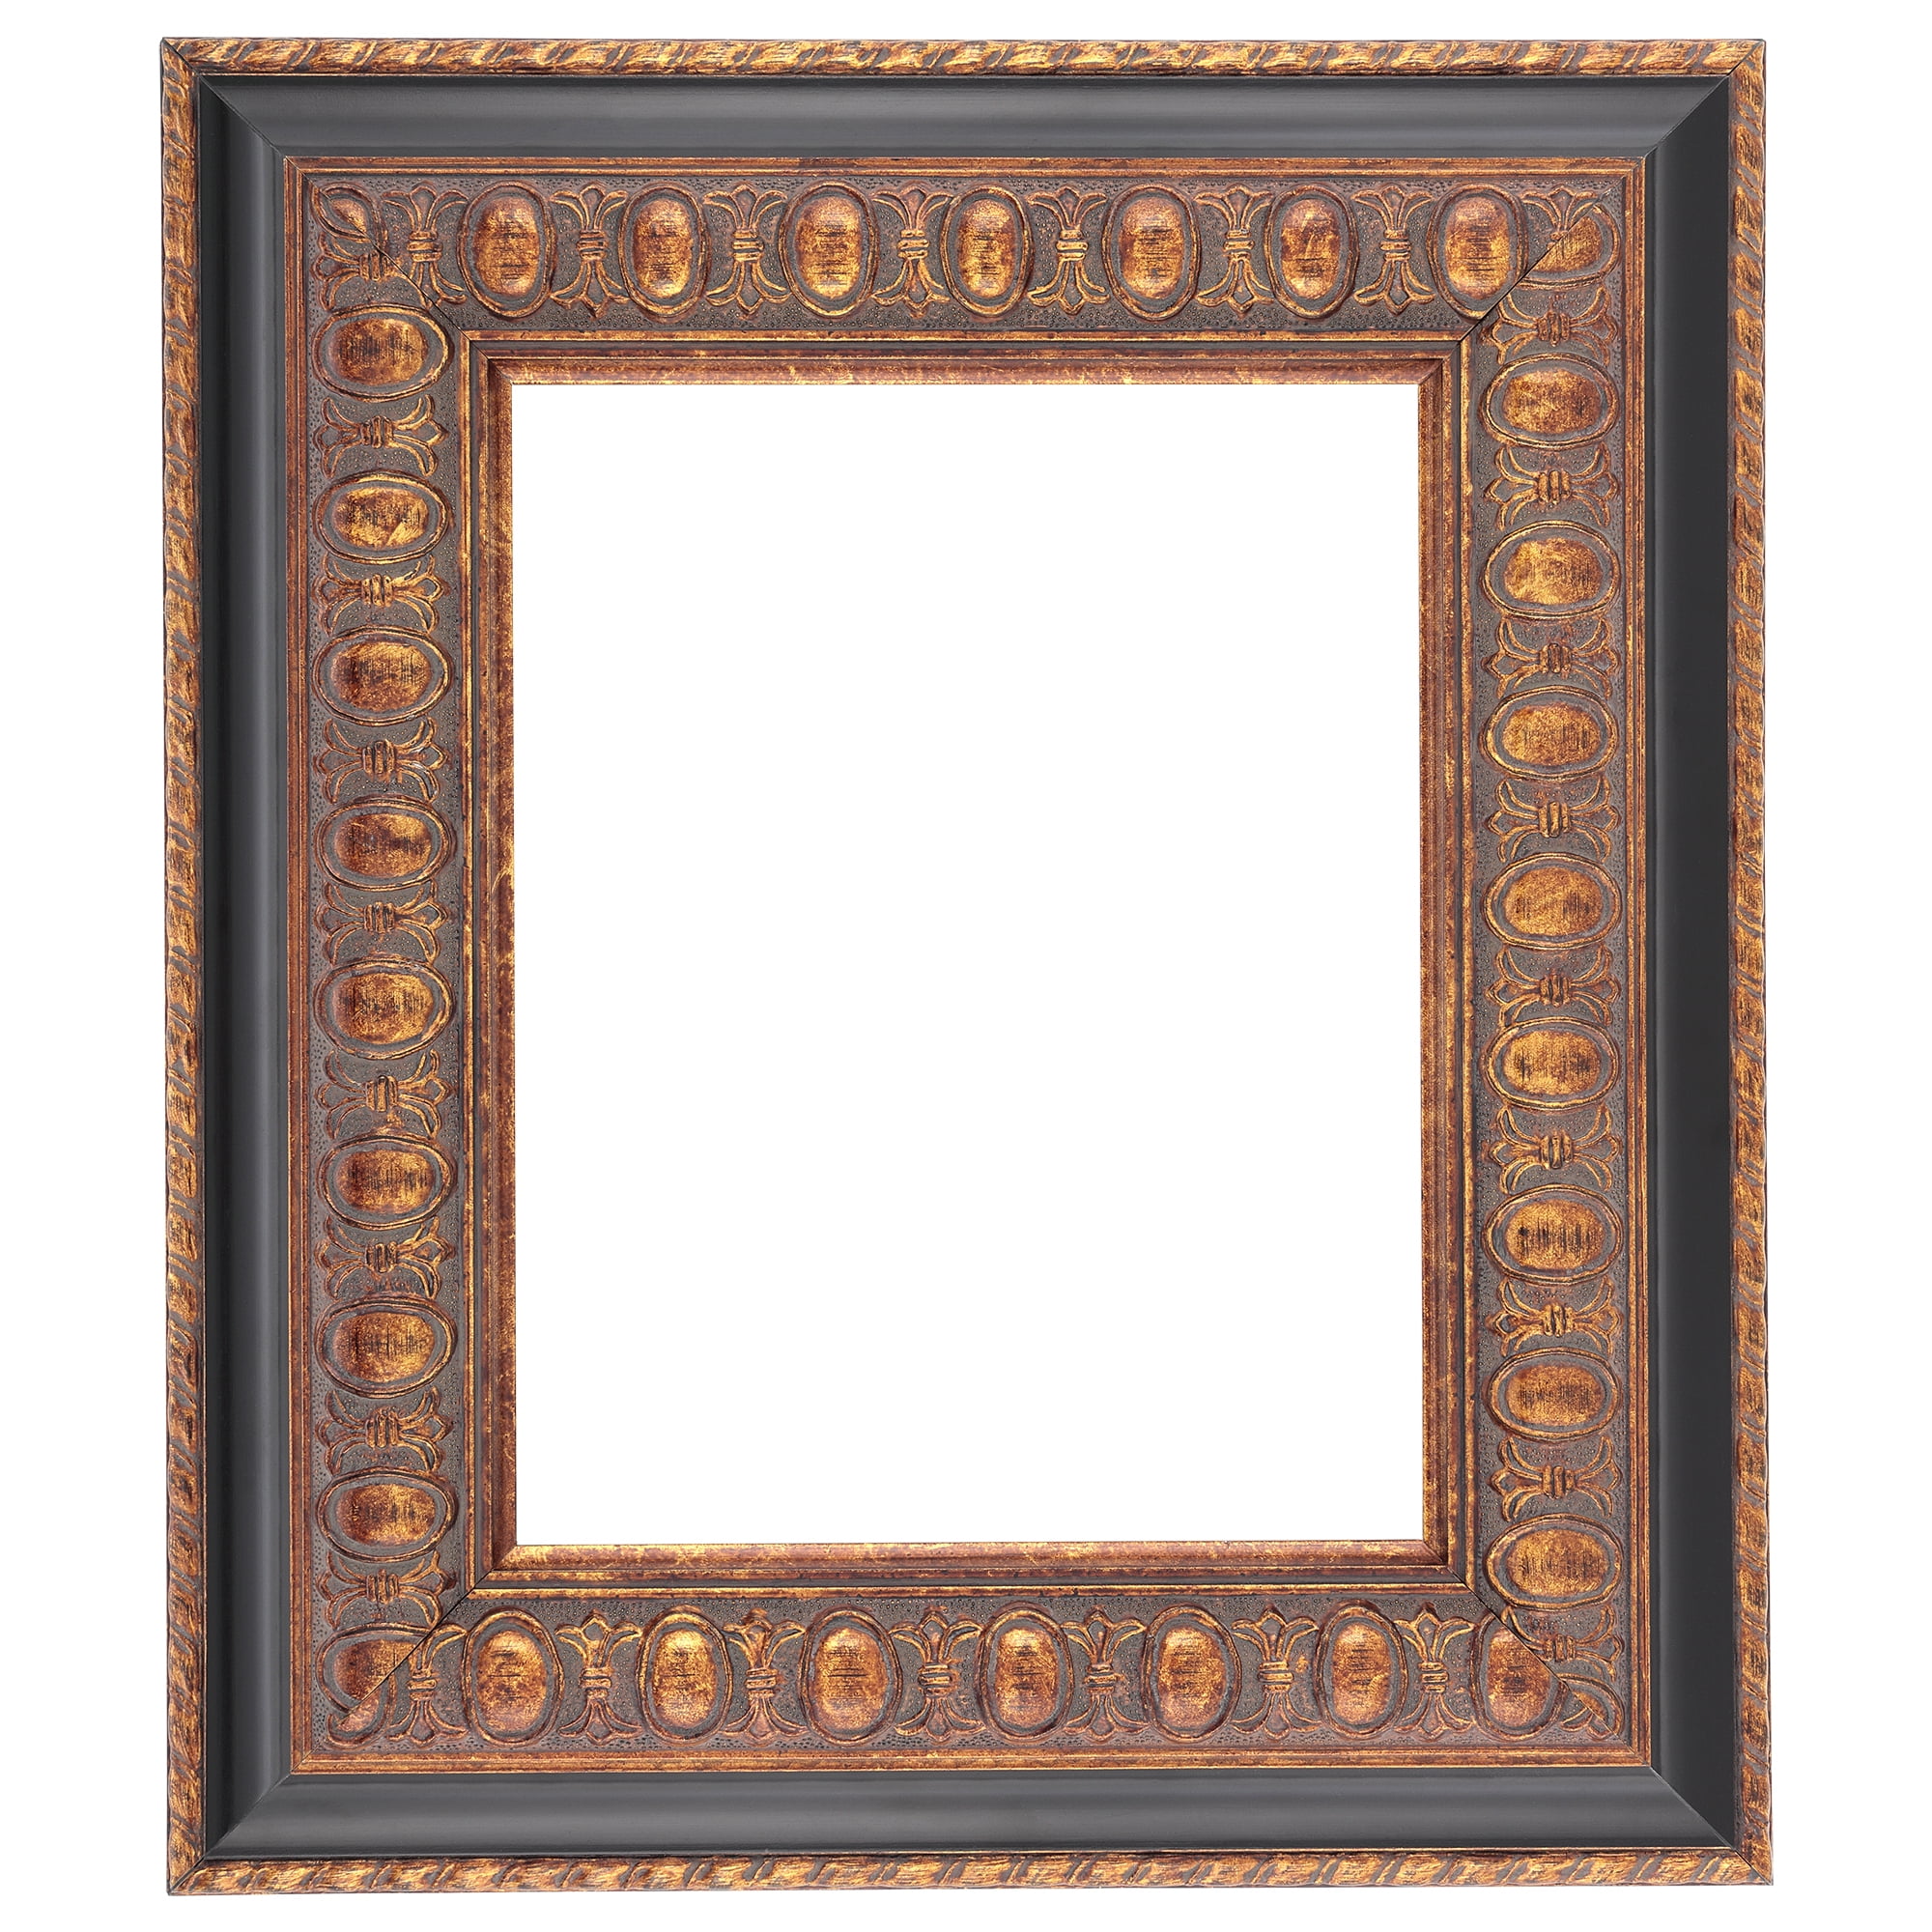 High Durability Antique Gold Ornate Picture Frame Available In All Sizes